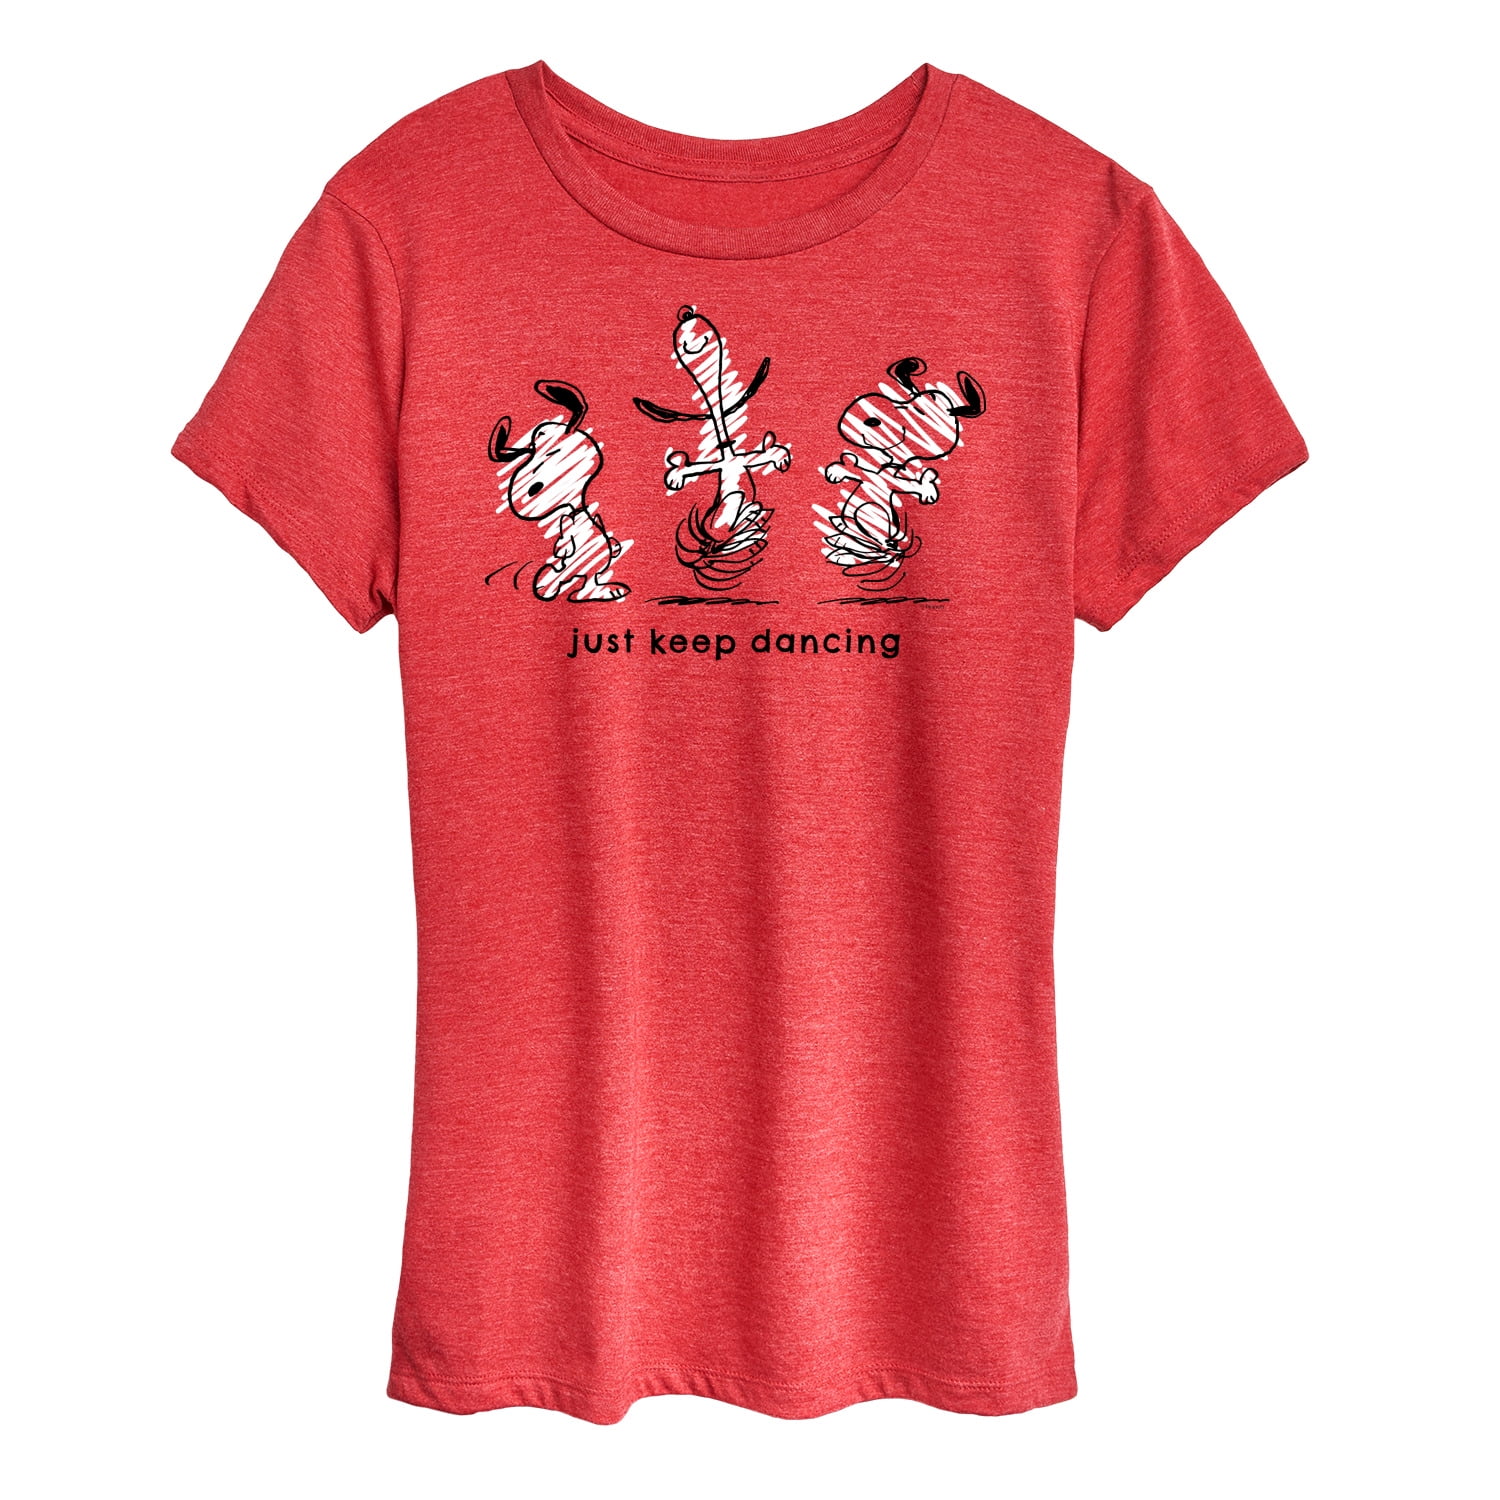 Short - Keep Sleeve T-Shirt Graphic Dancing - Peanuts Snoopy Women\'s Just